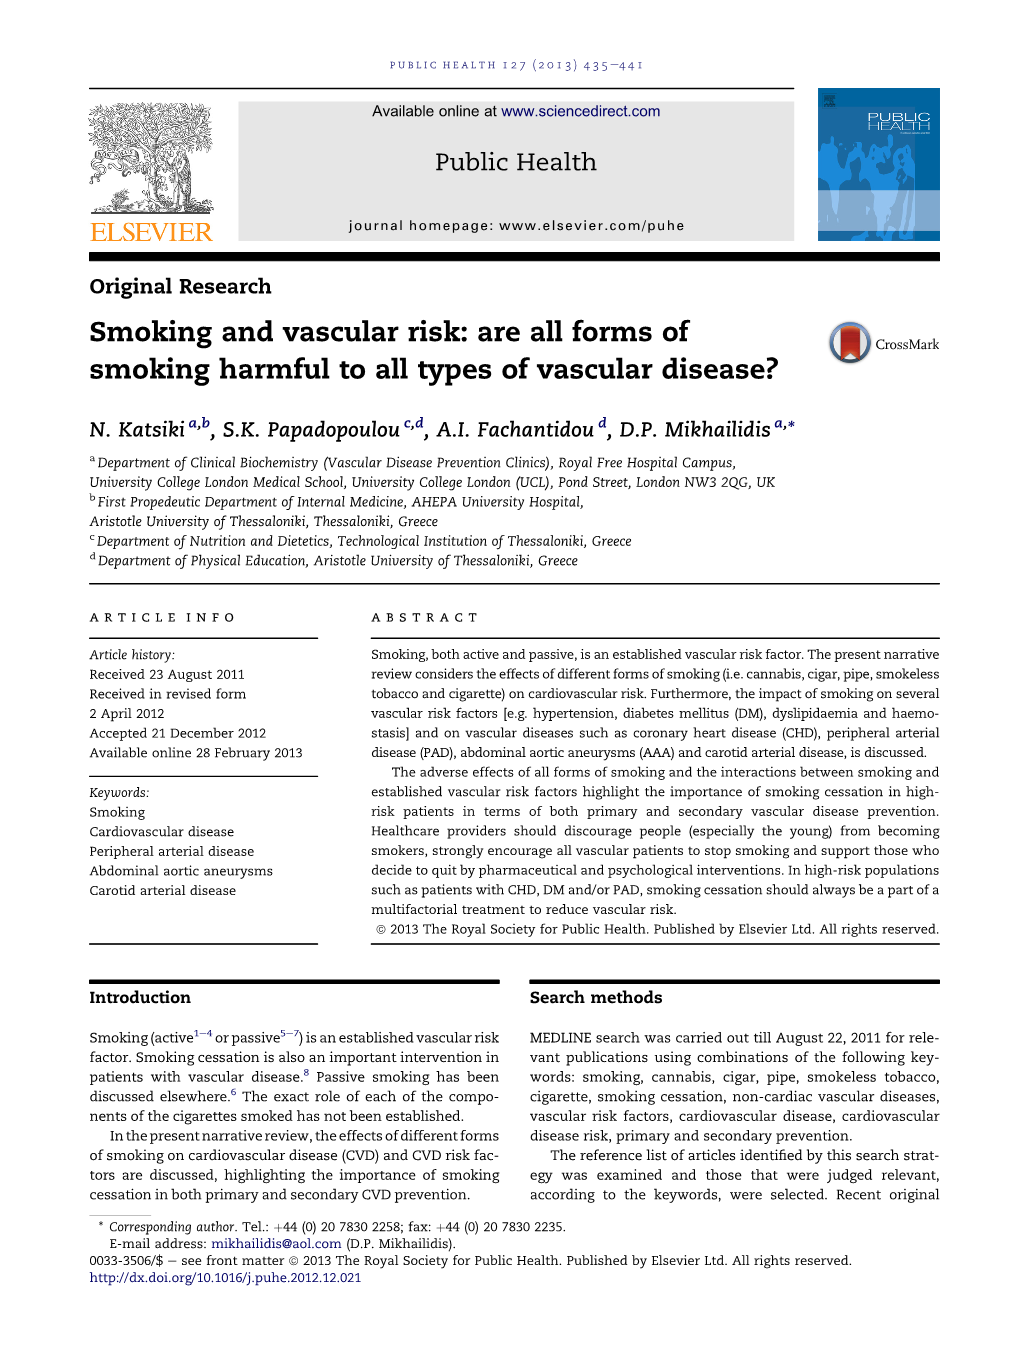 Smoking and Vascular Risk: Are All Forms of Smoking Harmful to All Types of Vascular Disease?